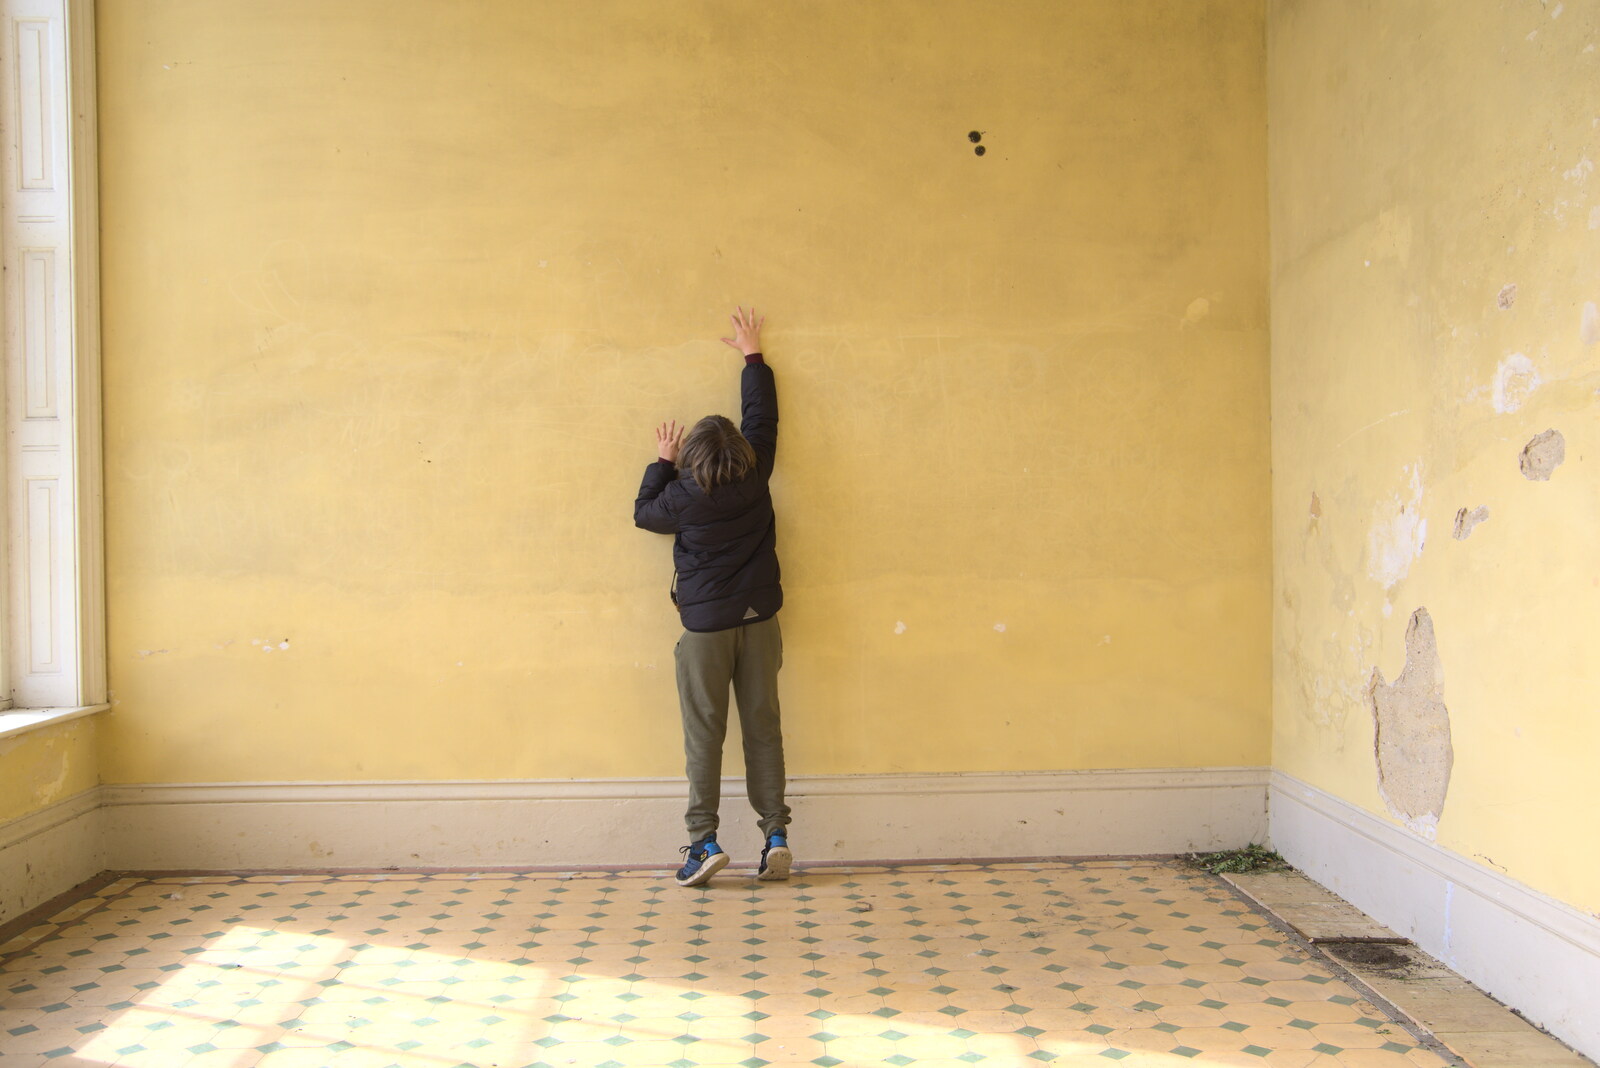 Fred reaches up the wall from A Return to Ickworth House, Horringer, Suffolk - 11th April 2021